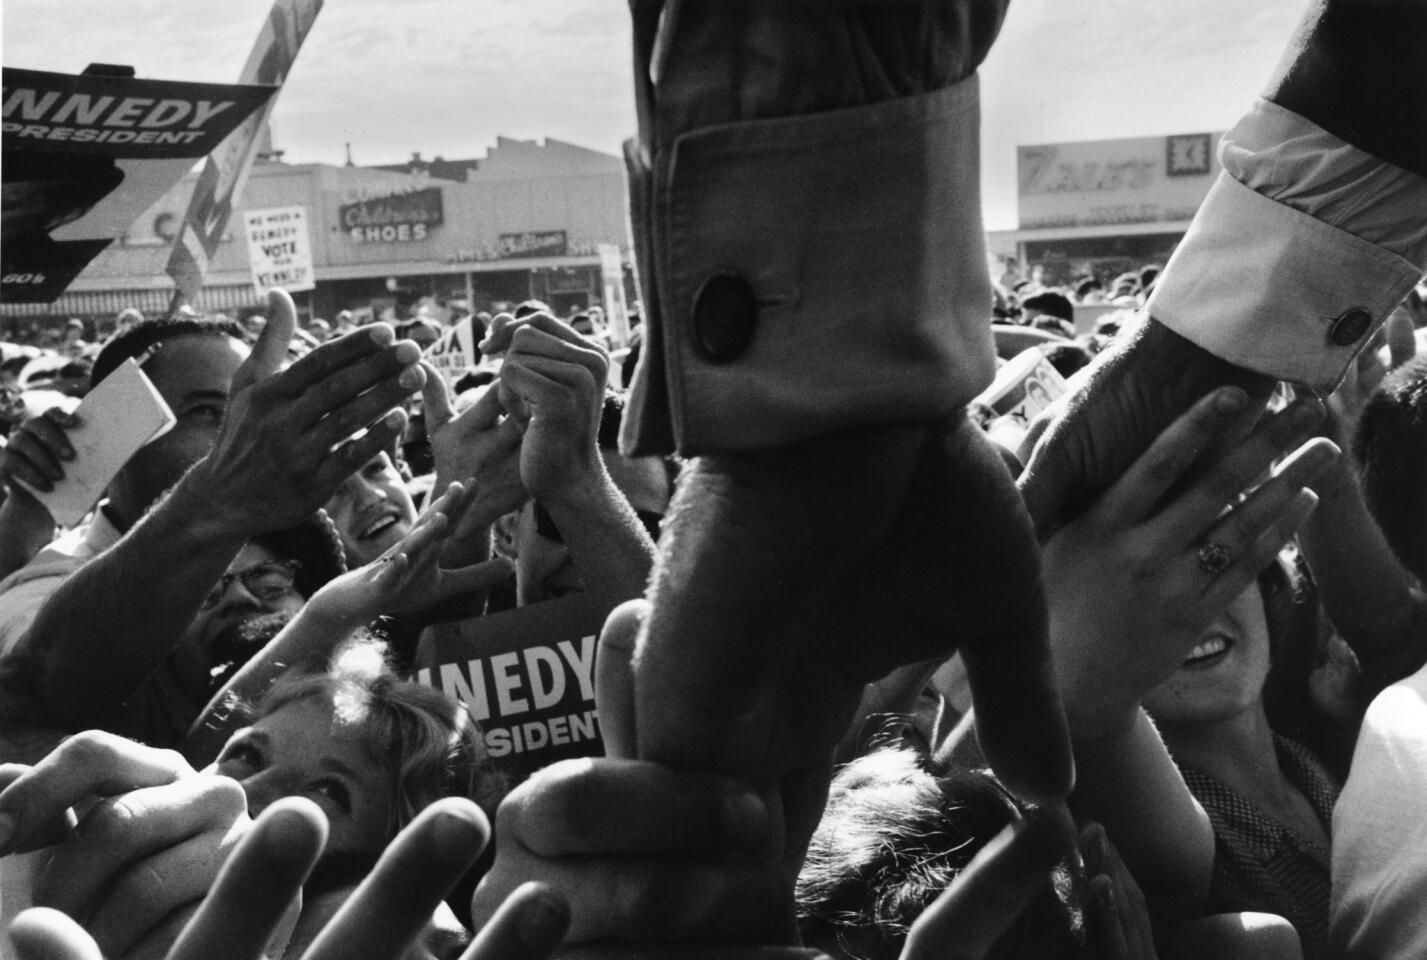 "John F. Kennedy reaching into a crowd of supporters, North Hollywood, California," 1960. This image is part of "A Bystander's View of History" exhibition at the International Center of Photography.